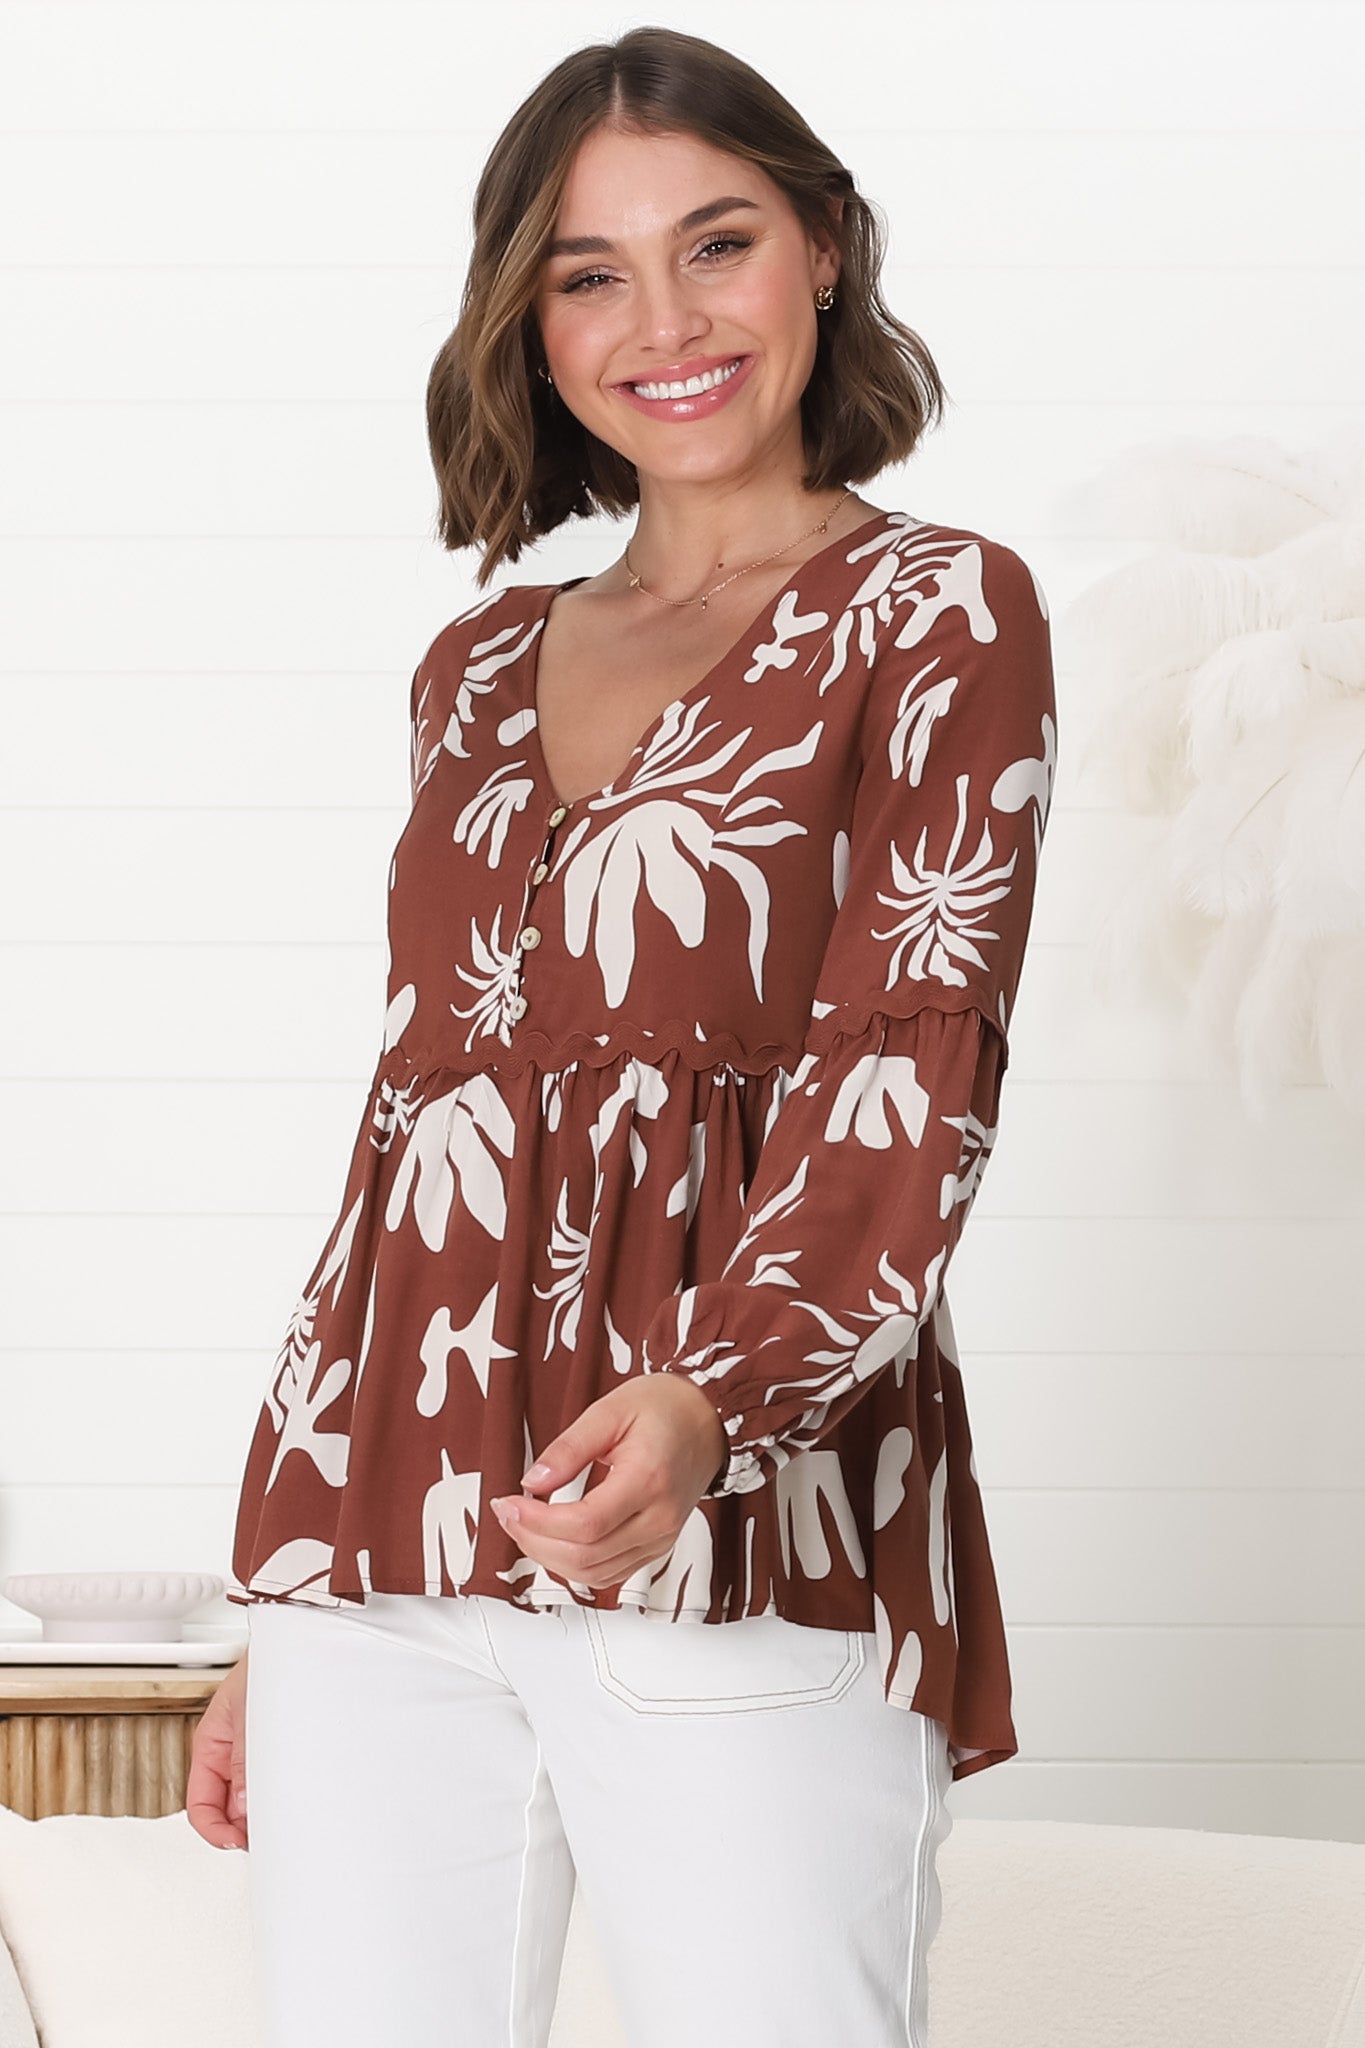 Hills Blouse - Buttoned Bodice Rick Rack Detail Smock Blouse in Wells Print Brown